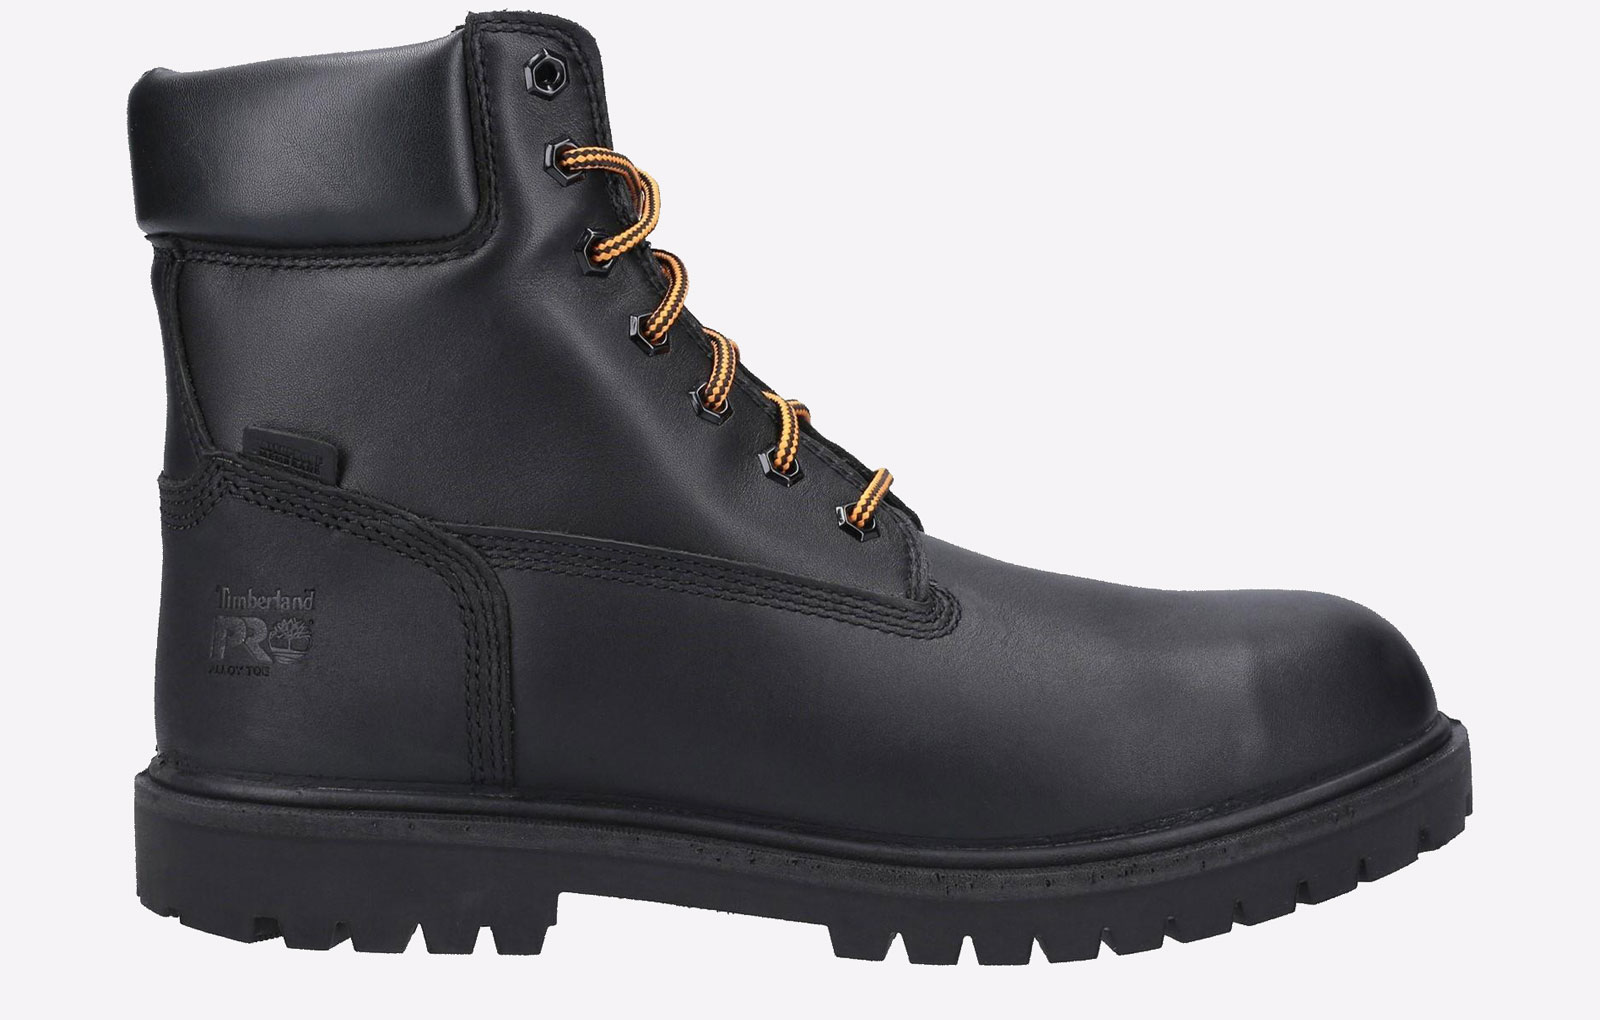 Timberland Pro Iconic Safety Toe Work Boot Mens - GRD-30949-52788-14